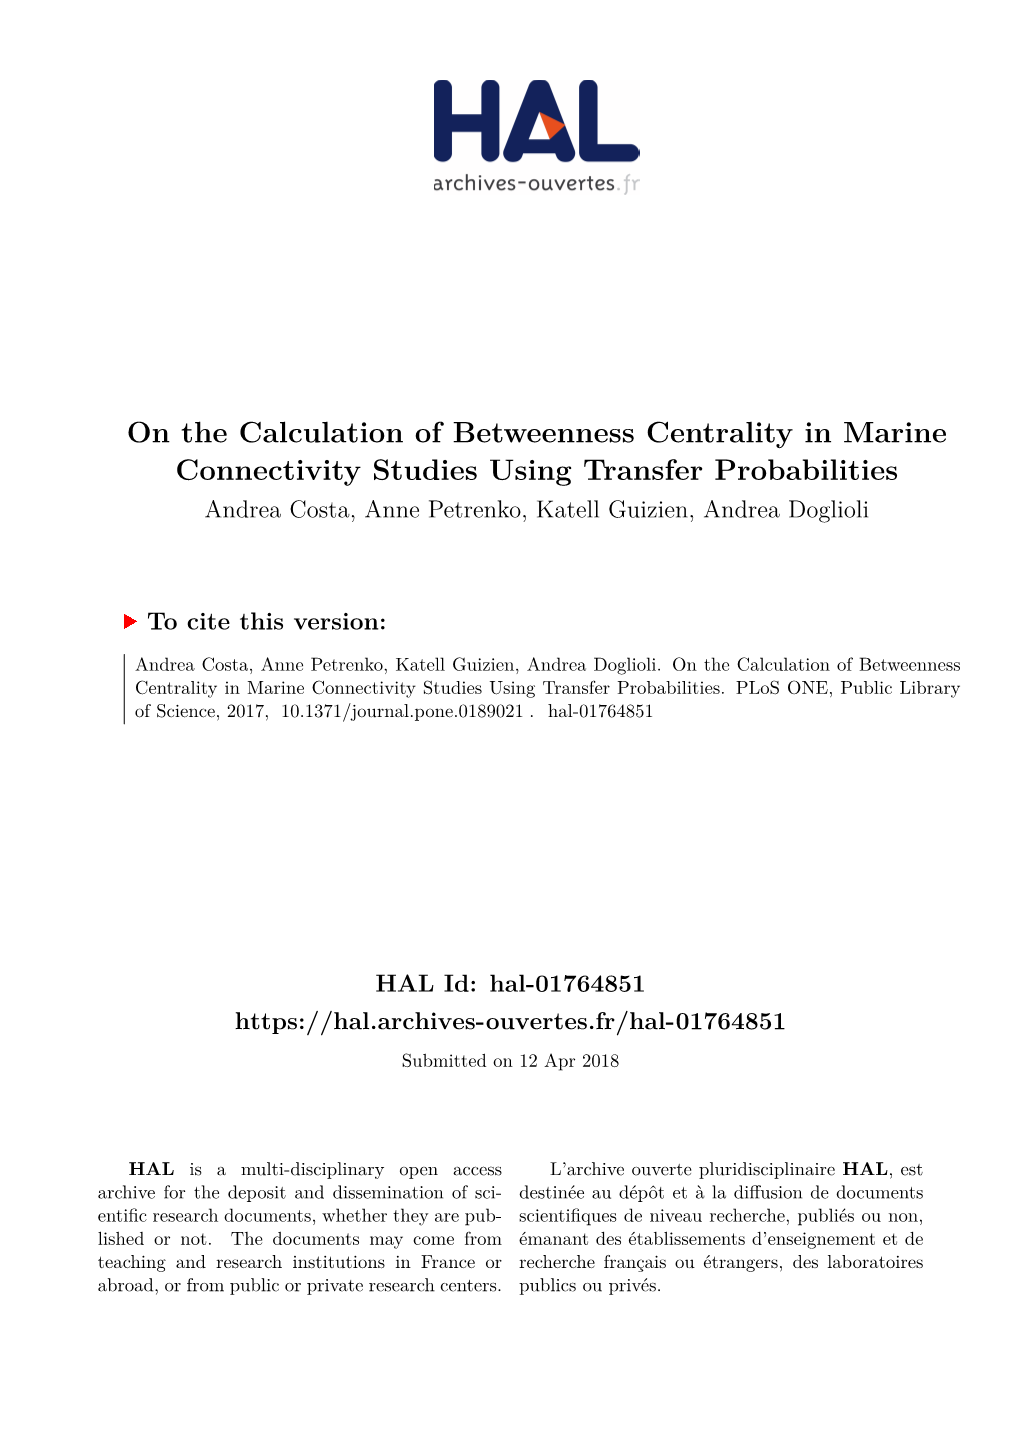 On the Calculation of Betweenness Centrality in Marine Connectivity Studies Using Transfer Probabilities Andrea Costa, Anne Petrenko, Katell Guizien, Andrea Doglioli